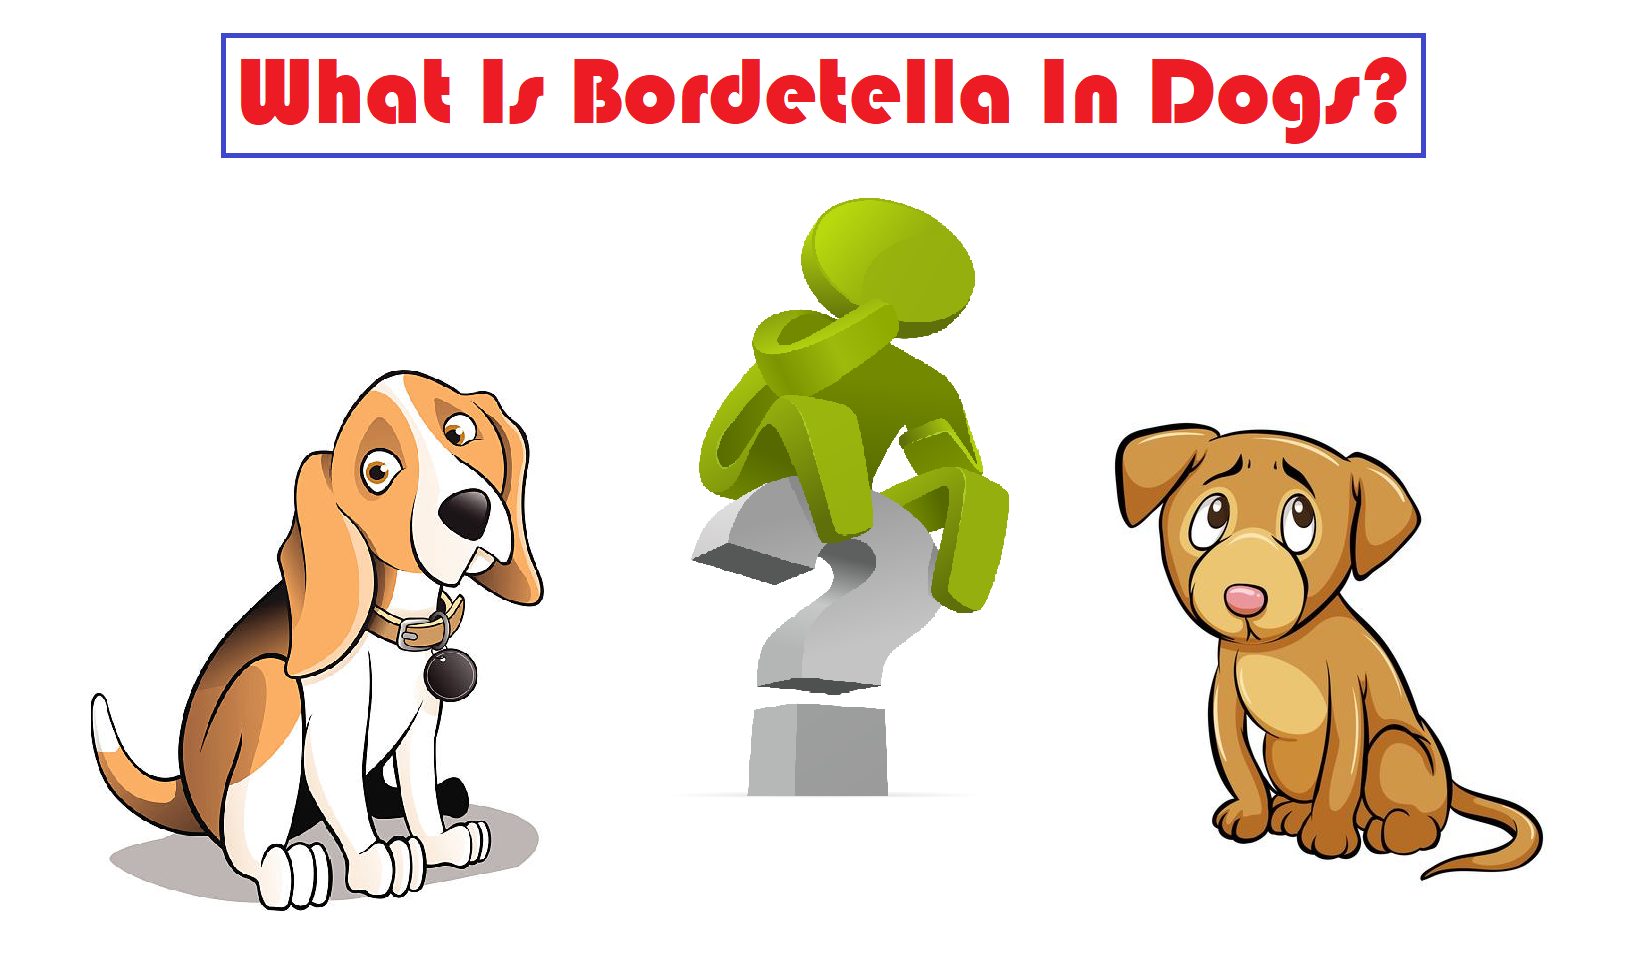 What Is Bordetella In Dogs?